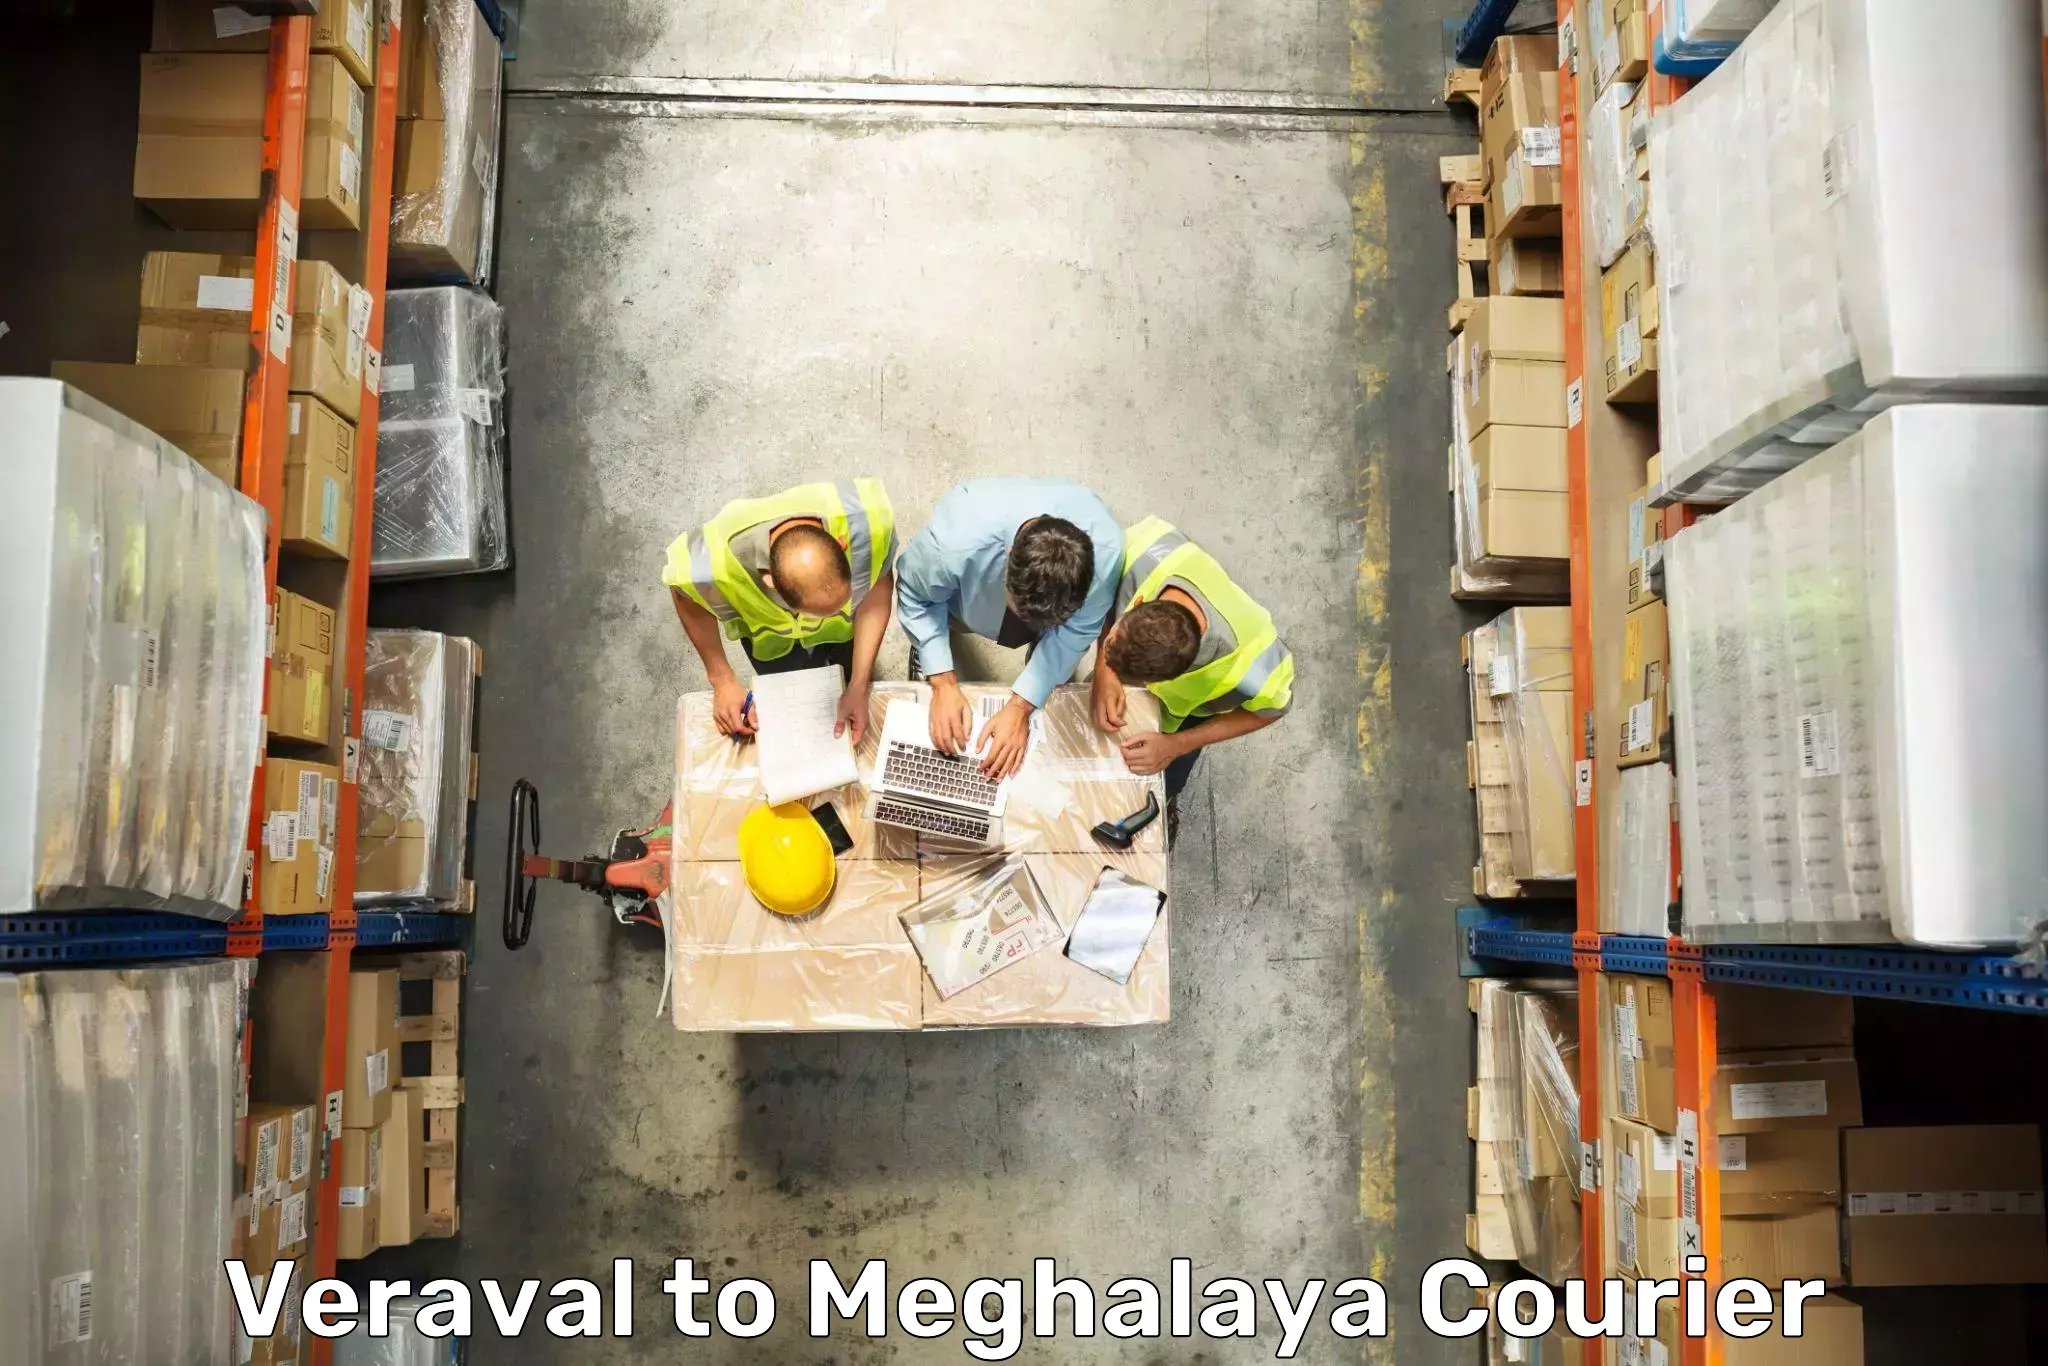 Luggage shipping specialists Veraval to Cherrapunji